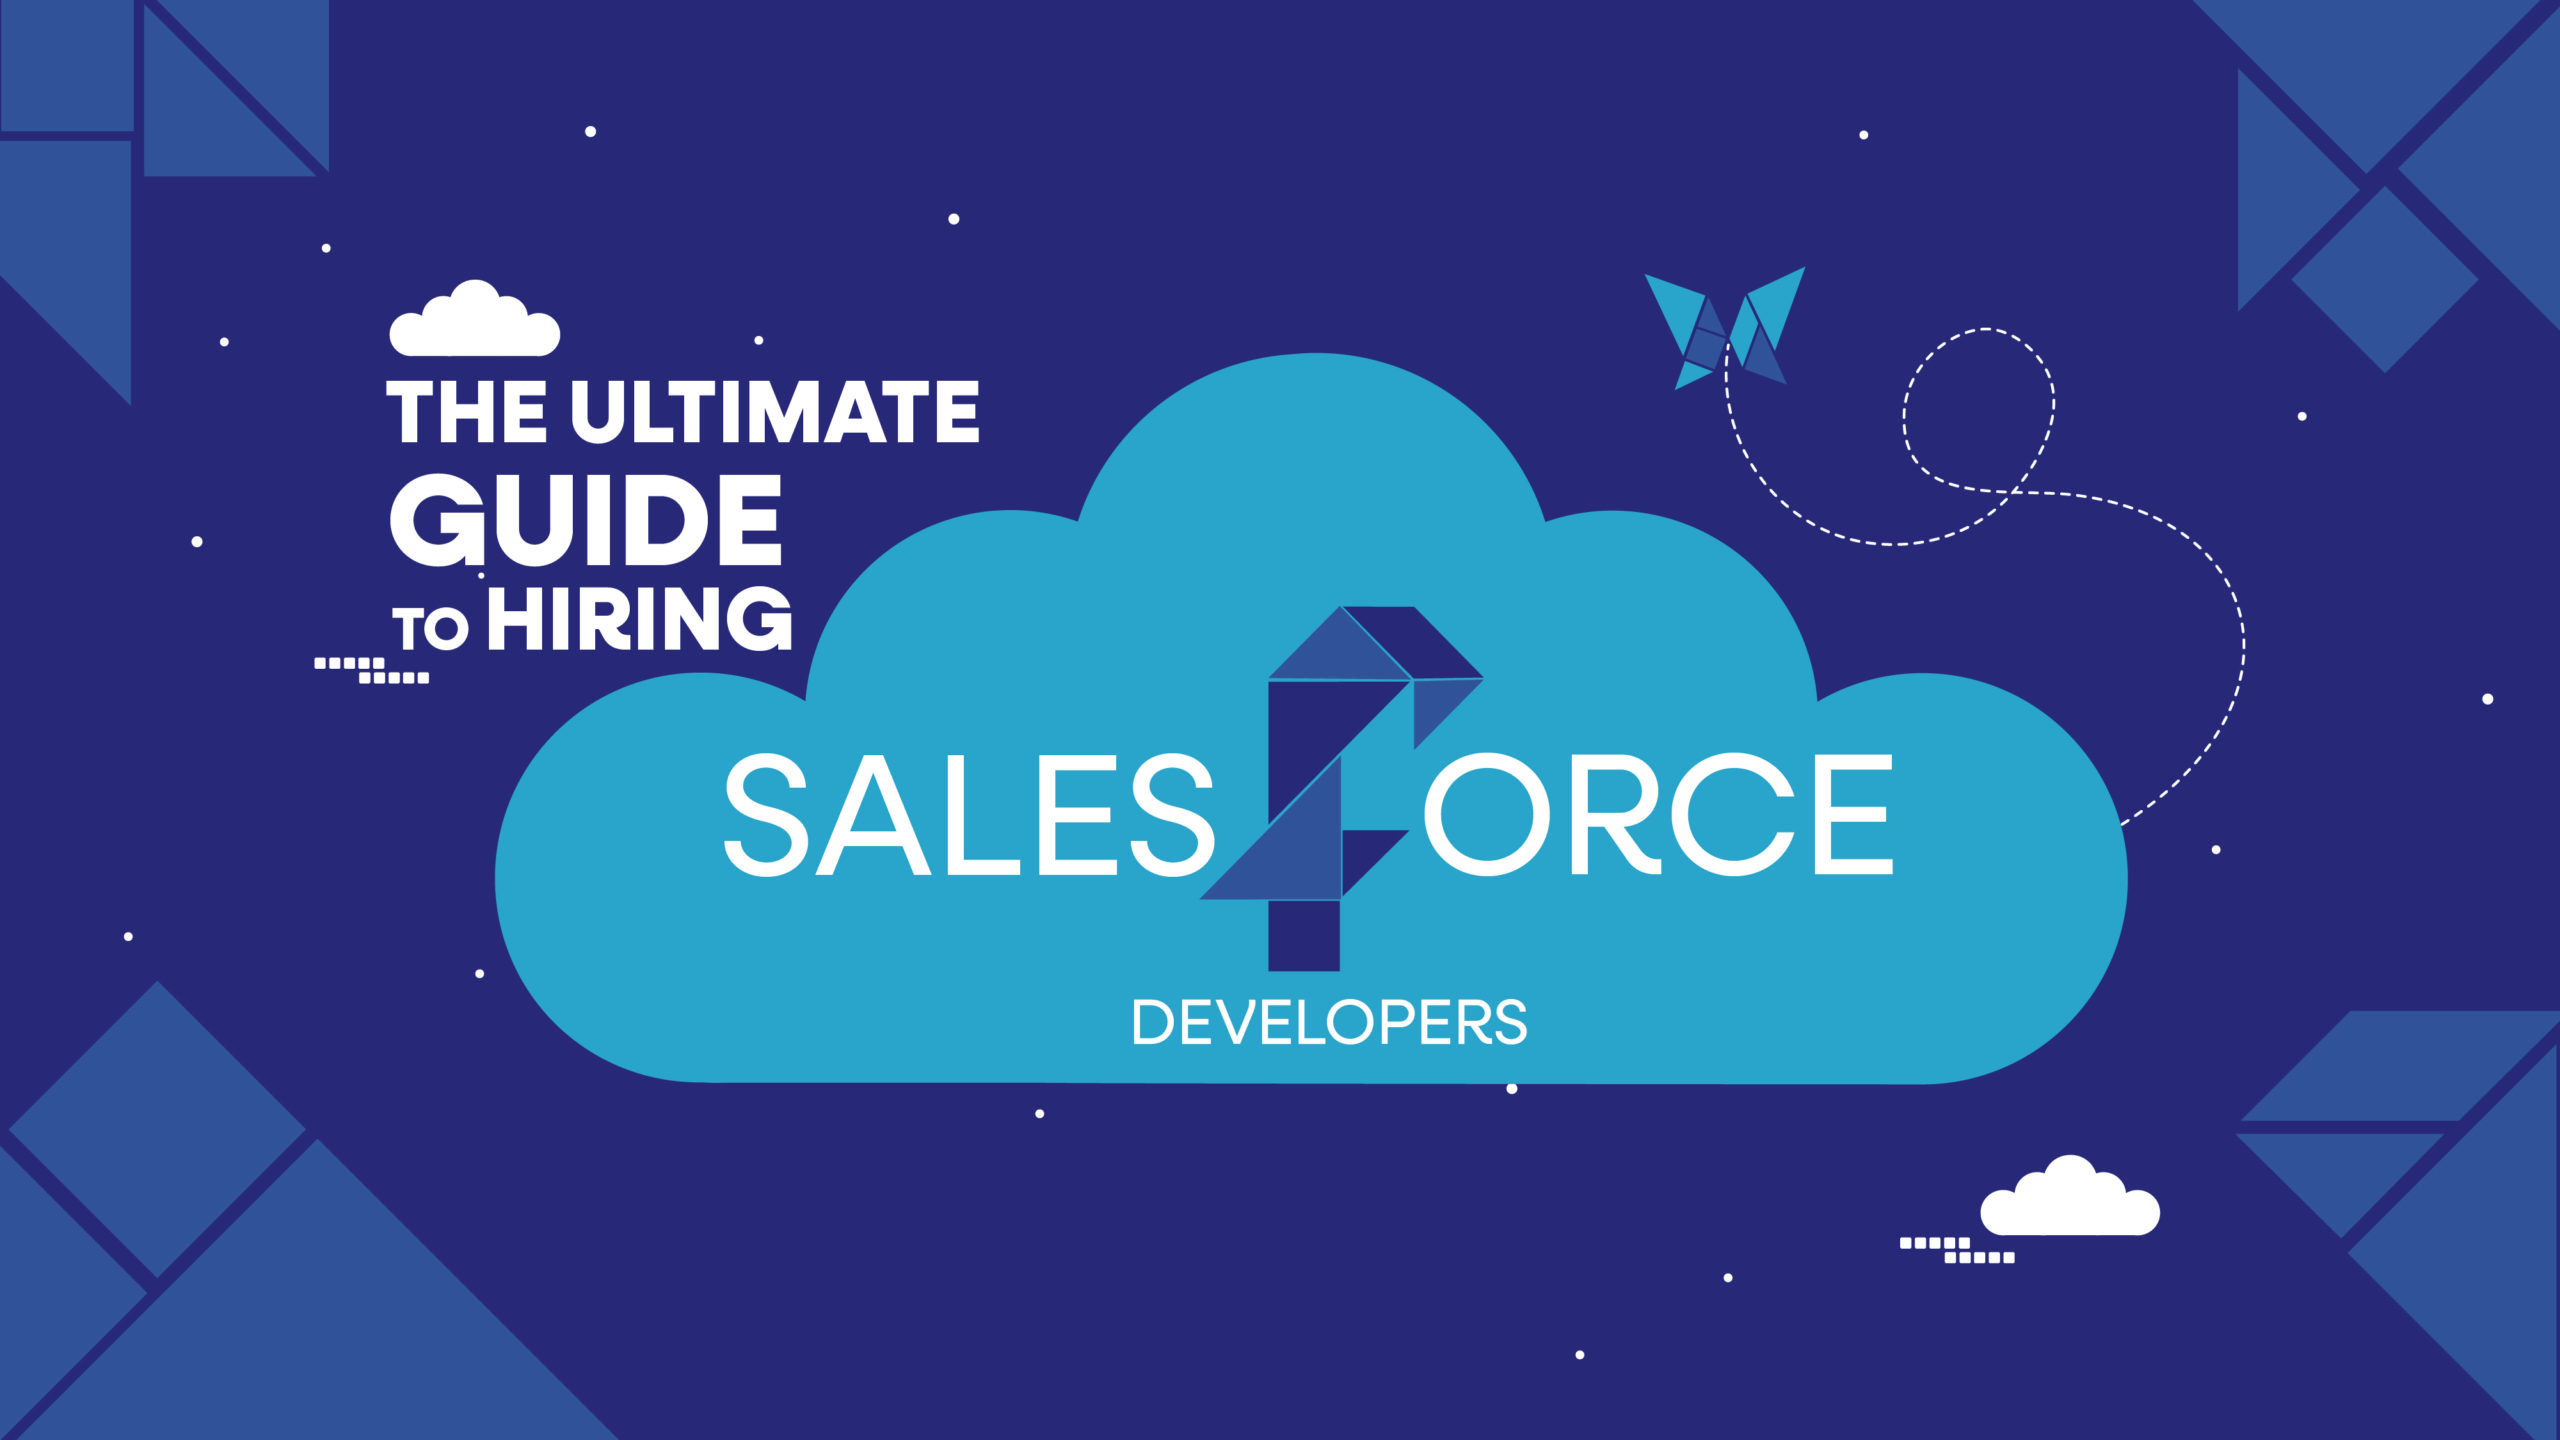 The Ultimate Guide to Hiring Salesforce Developers